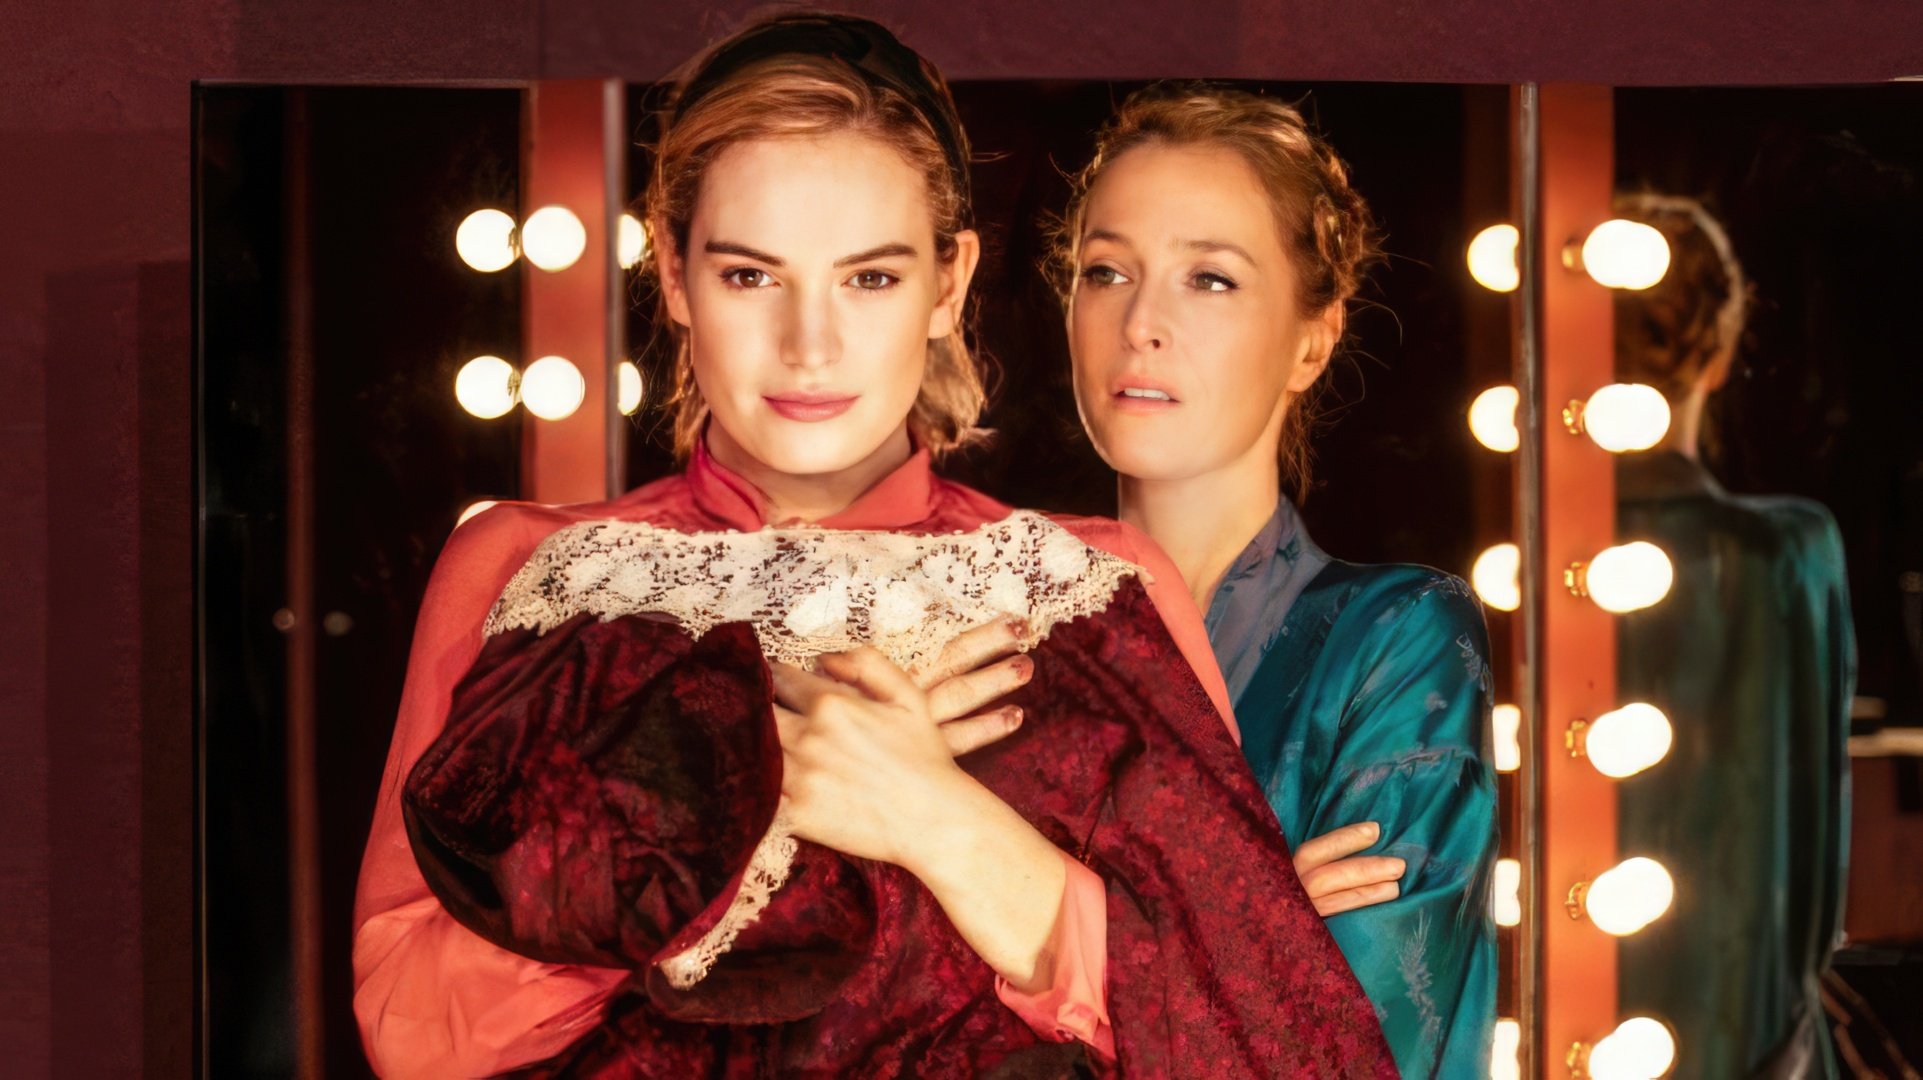 All About Eve: Lily James and Gillian Anderson